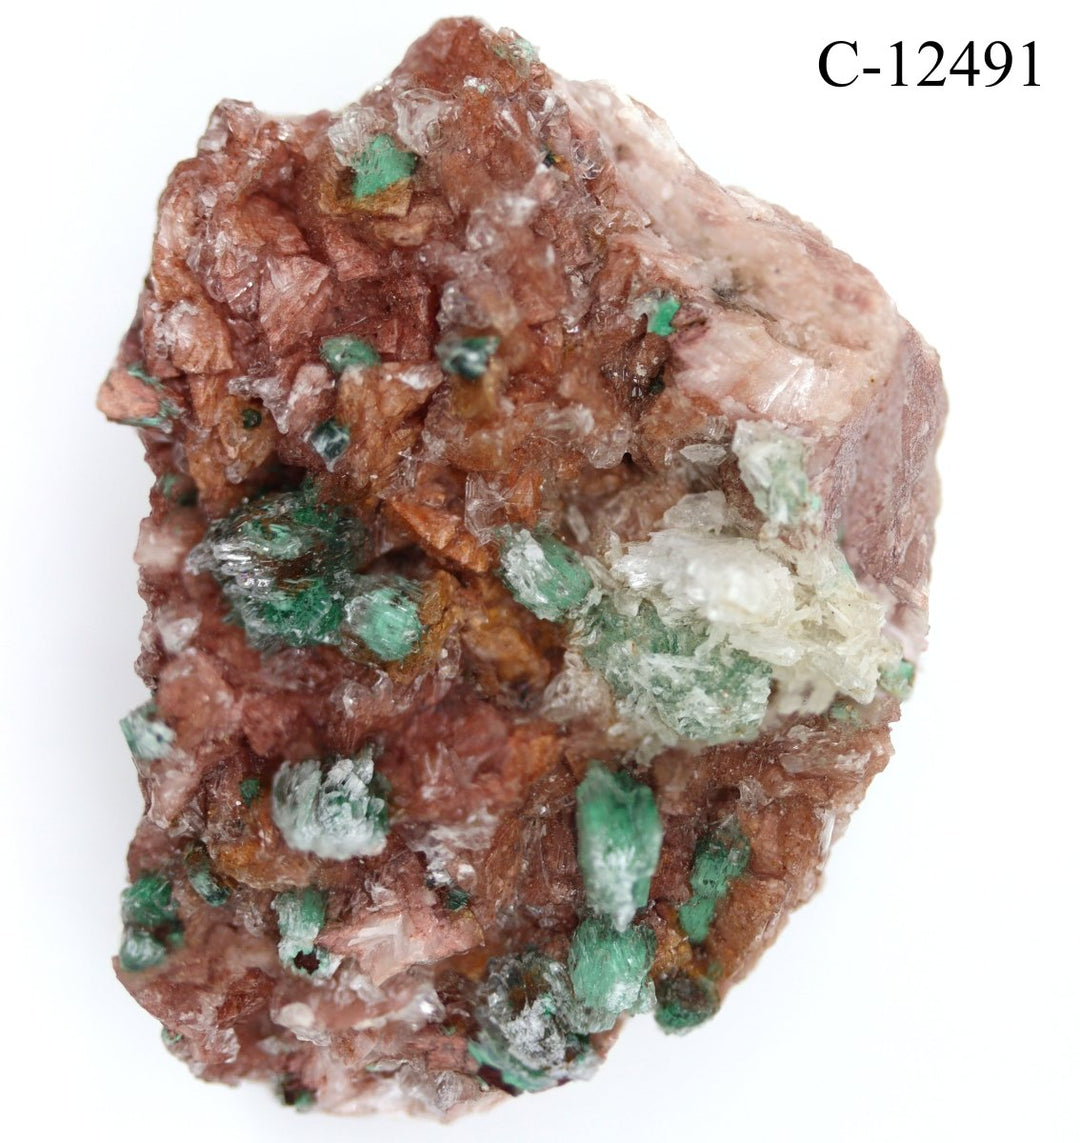 C-12491 Dolomite on mixed other minerals from Morocco 3.8oz